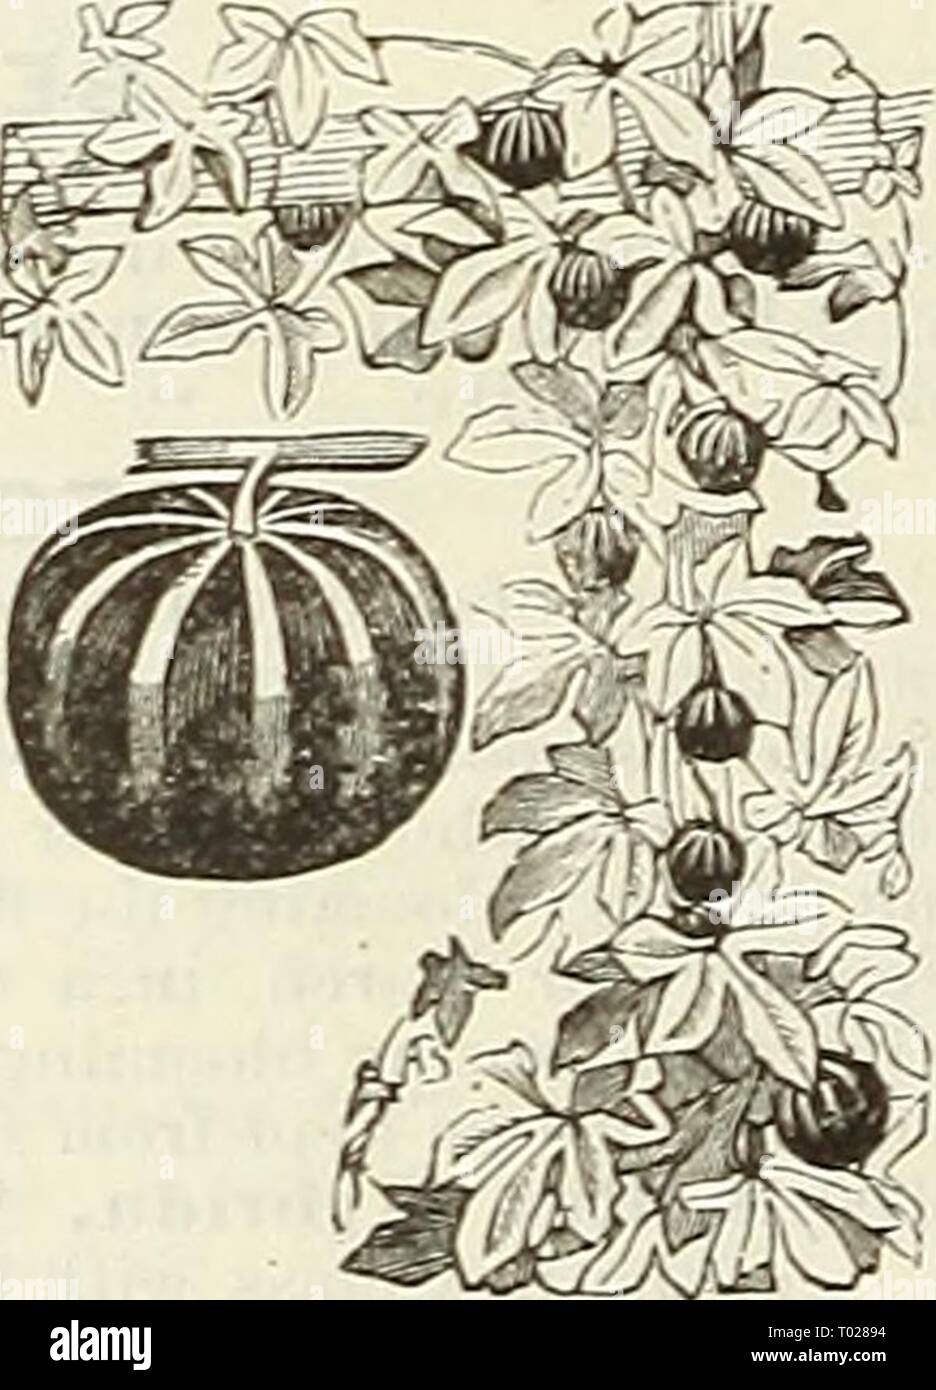 Dreer's garden calendar for 1888 . dreersgardencale1888henr Year: 1888  Brachycome. Bryonopsis. BRYONOPSIS. A beautiful plant of the gourd species, with ivy-like pale green foliage and showy scarlet fruit, striped with white : half-hardy annual; 10 feet. 5313 B. Laciniosa Ervthrocarpa 5 CALANDRINIA. Beautiful creeping, free flowering plants, with succu- lent stems and fleshy leaves, adapted for rock work or hot situations, requiring light, rich soil ; hardy annuals; 1 ft. 5342 C. Grandiflora, Mixed 5 Stock Photo